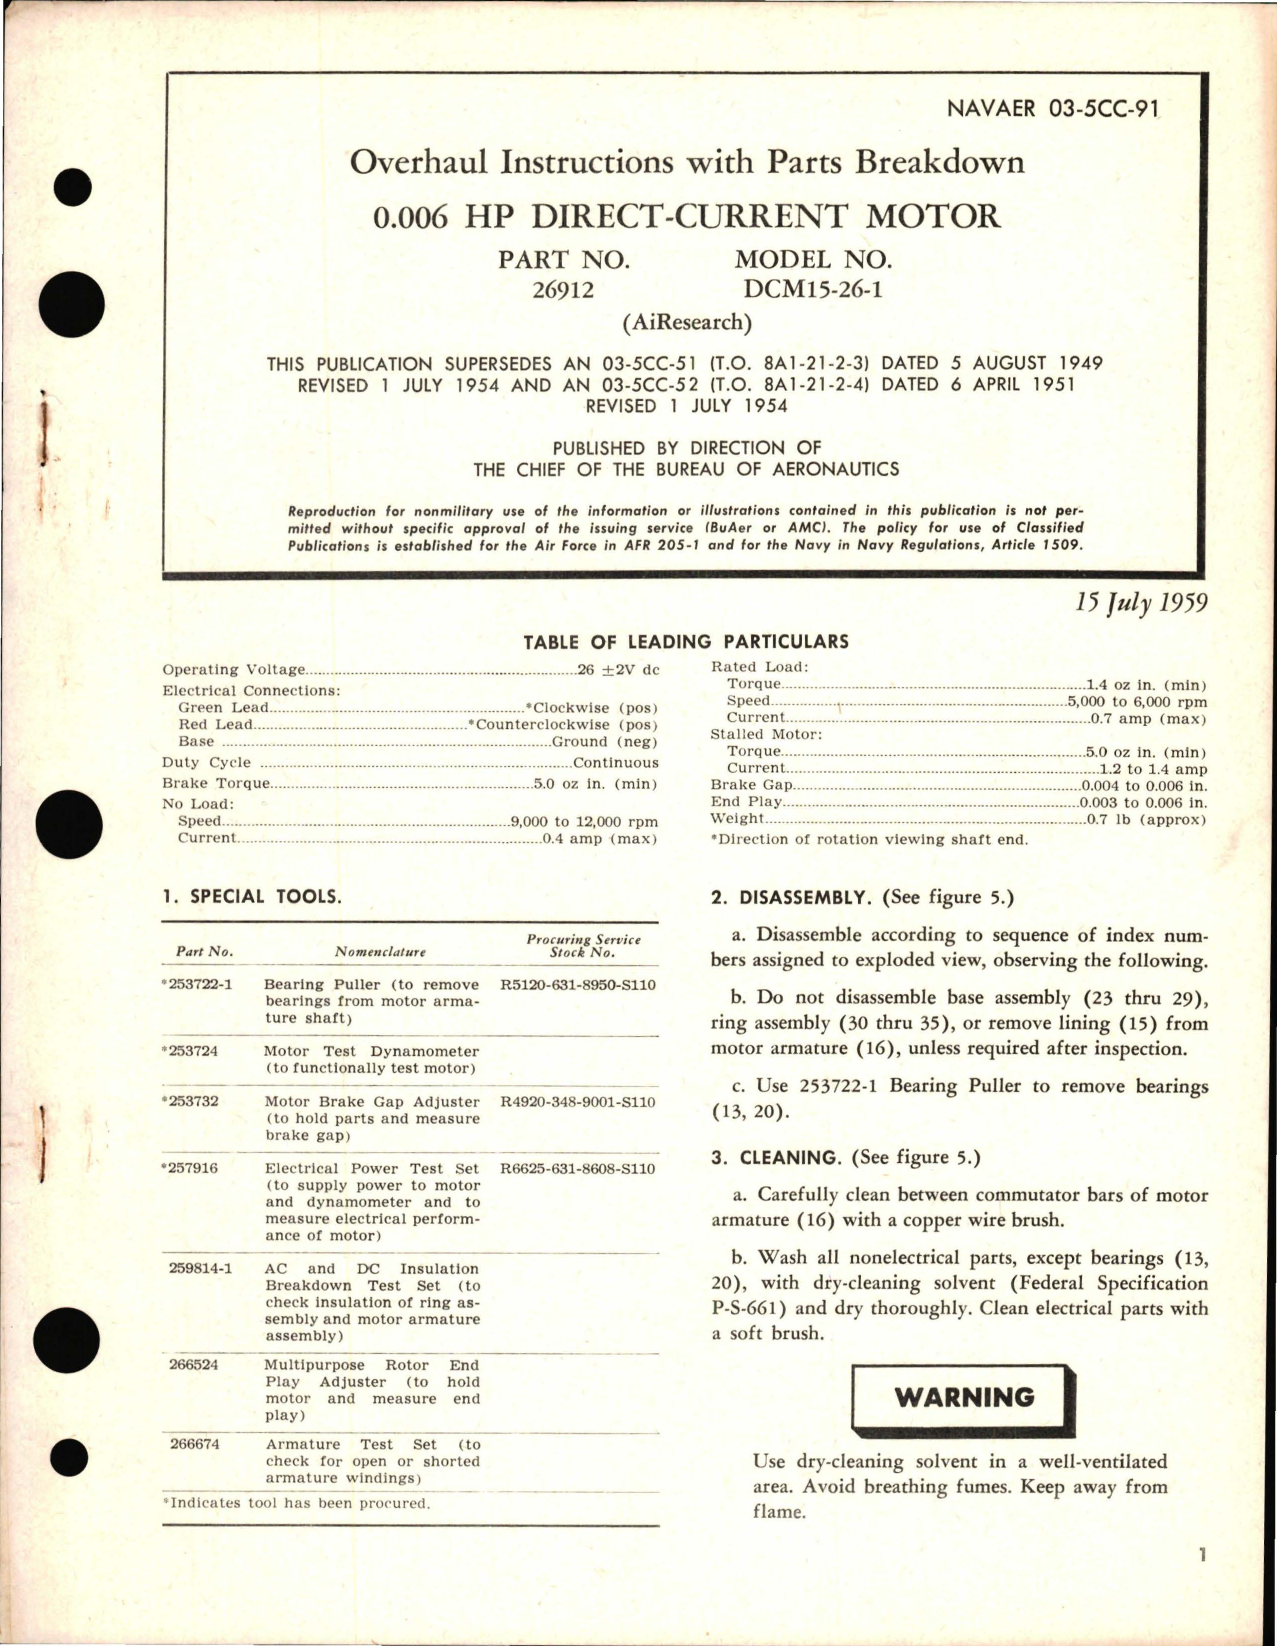 Sample page 1 from AirCorps Library document: Overhaul Instructions with Parts Breakdown for HP Direct Current Motor 0.006 Part 26912